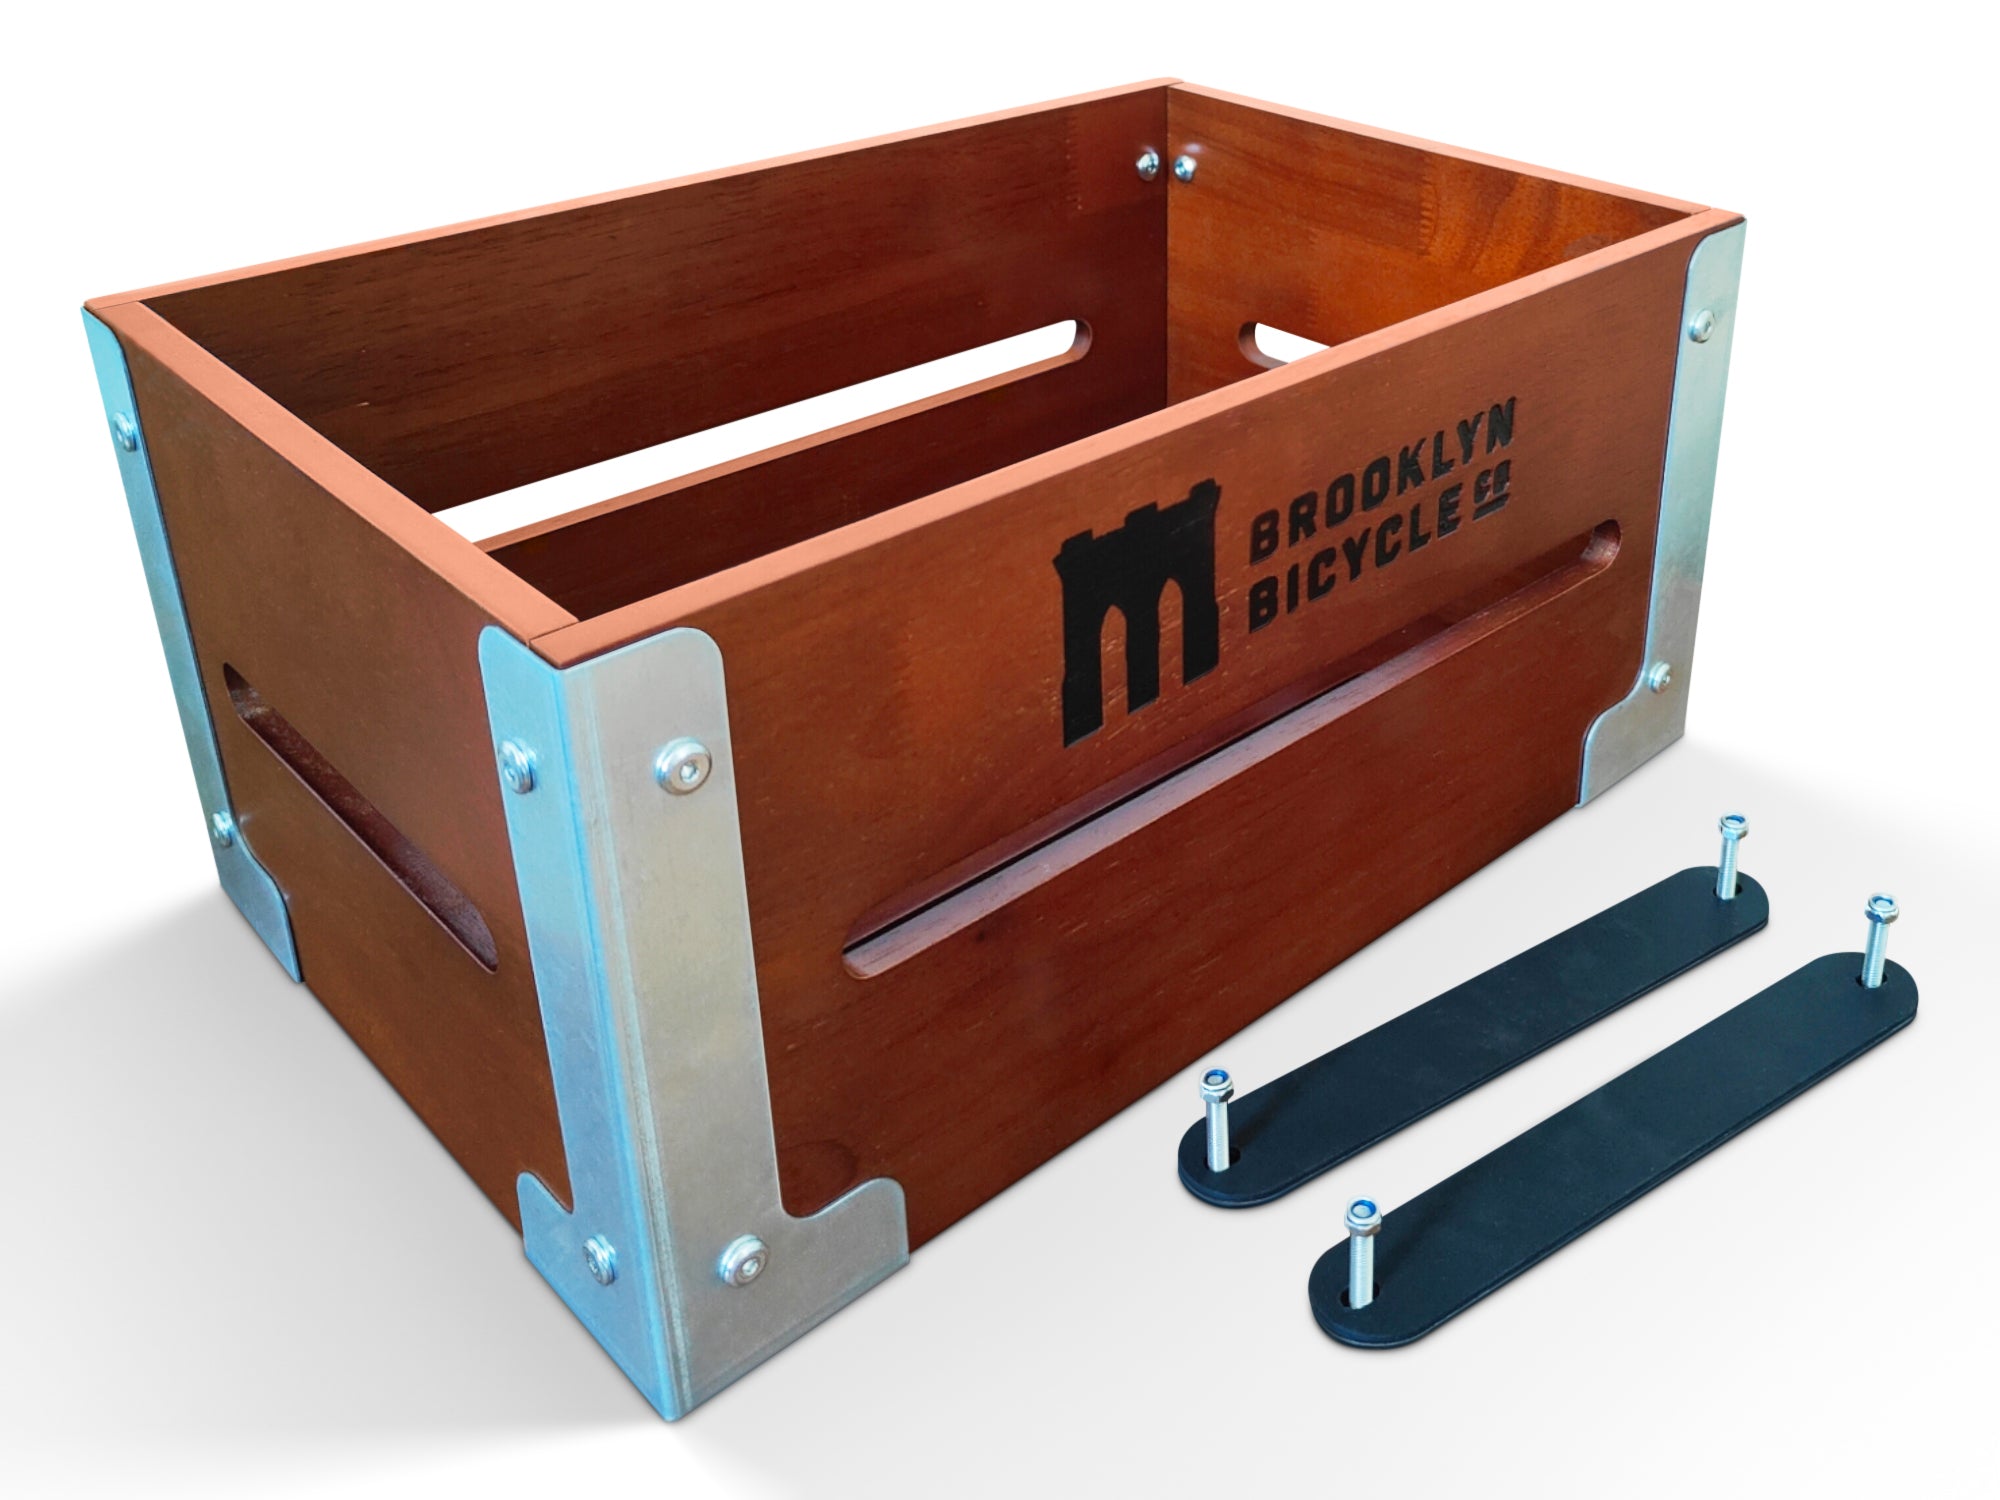 Brooklyn Bicycle Co. Handcrafted Wooden Crate